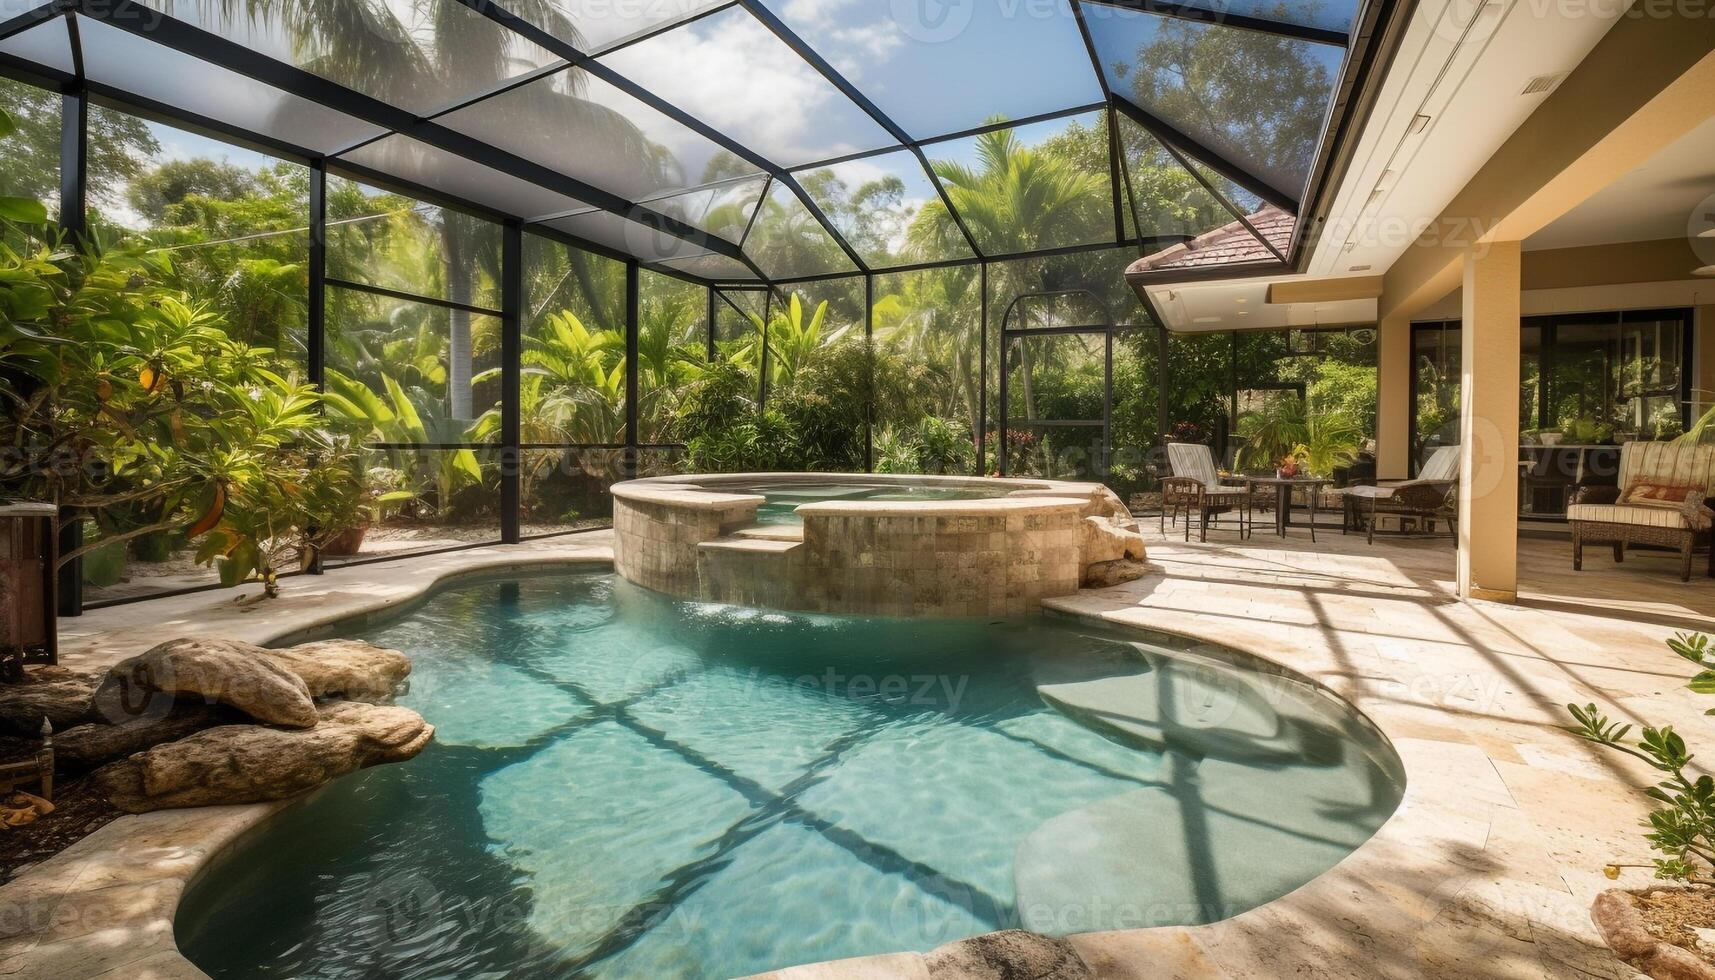 Modern architecture blends with nature in luxurious tropical swimming pool generated by AI photo